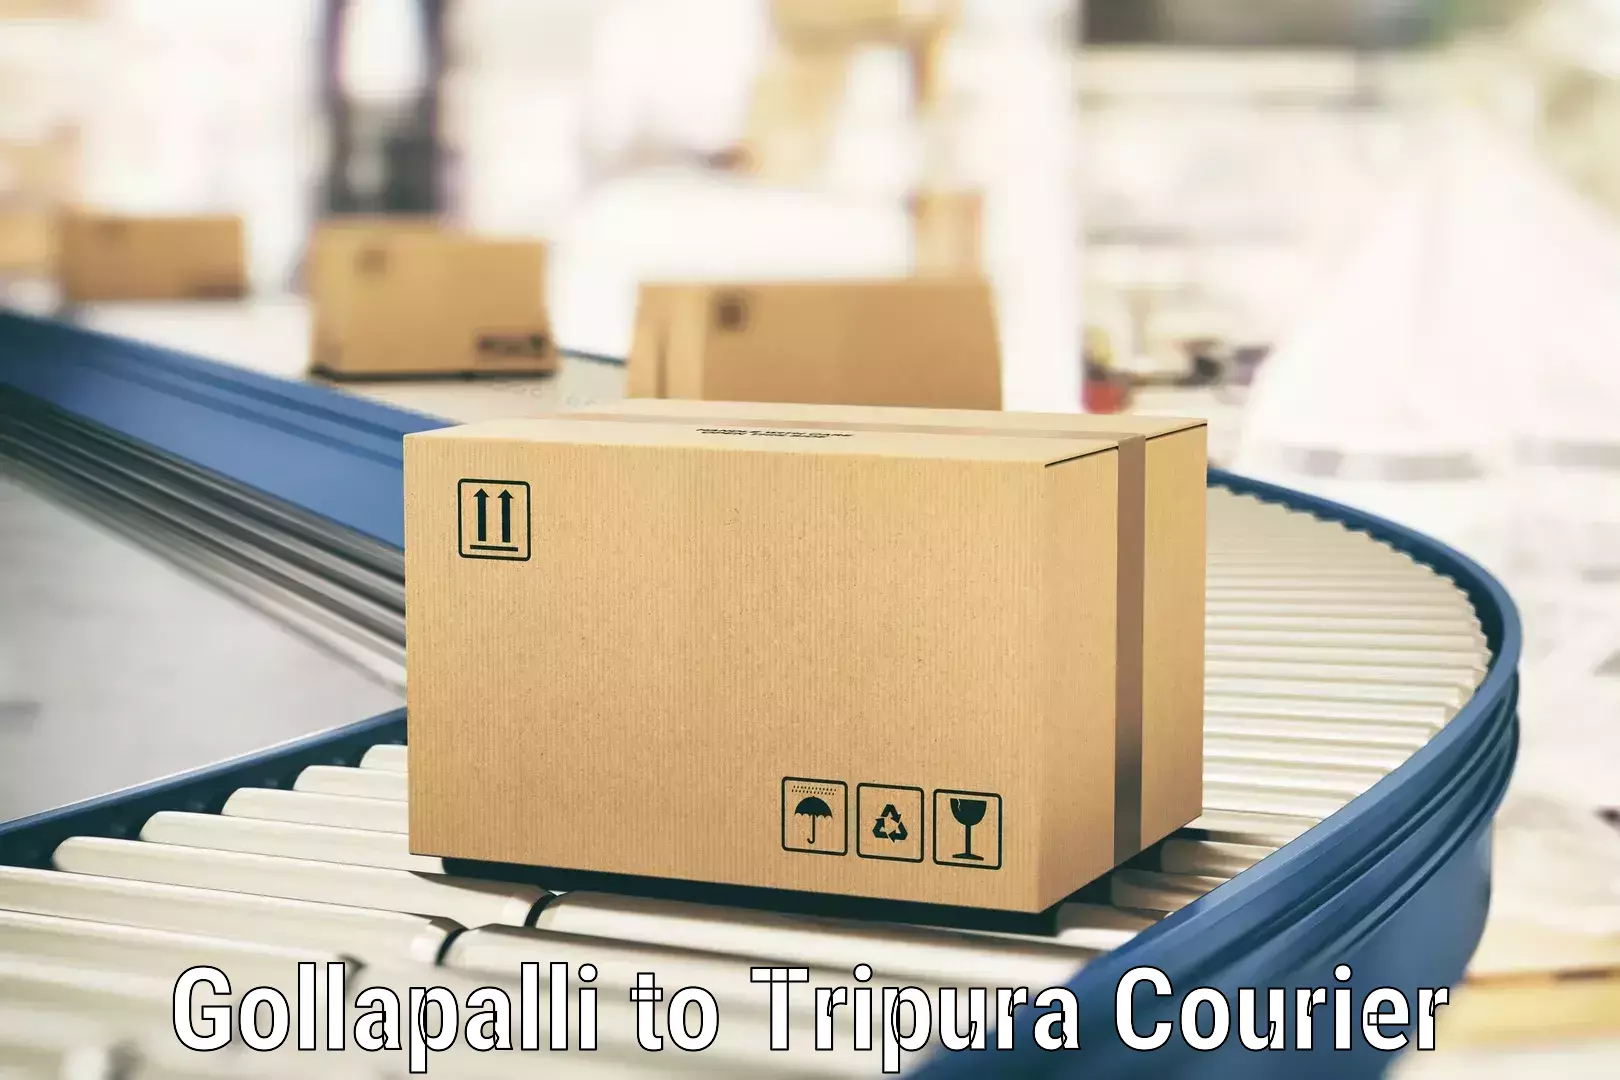 Global courier networks Gollapalli to Amarpur Gomati